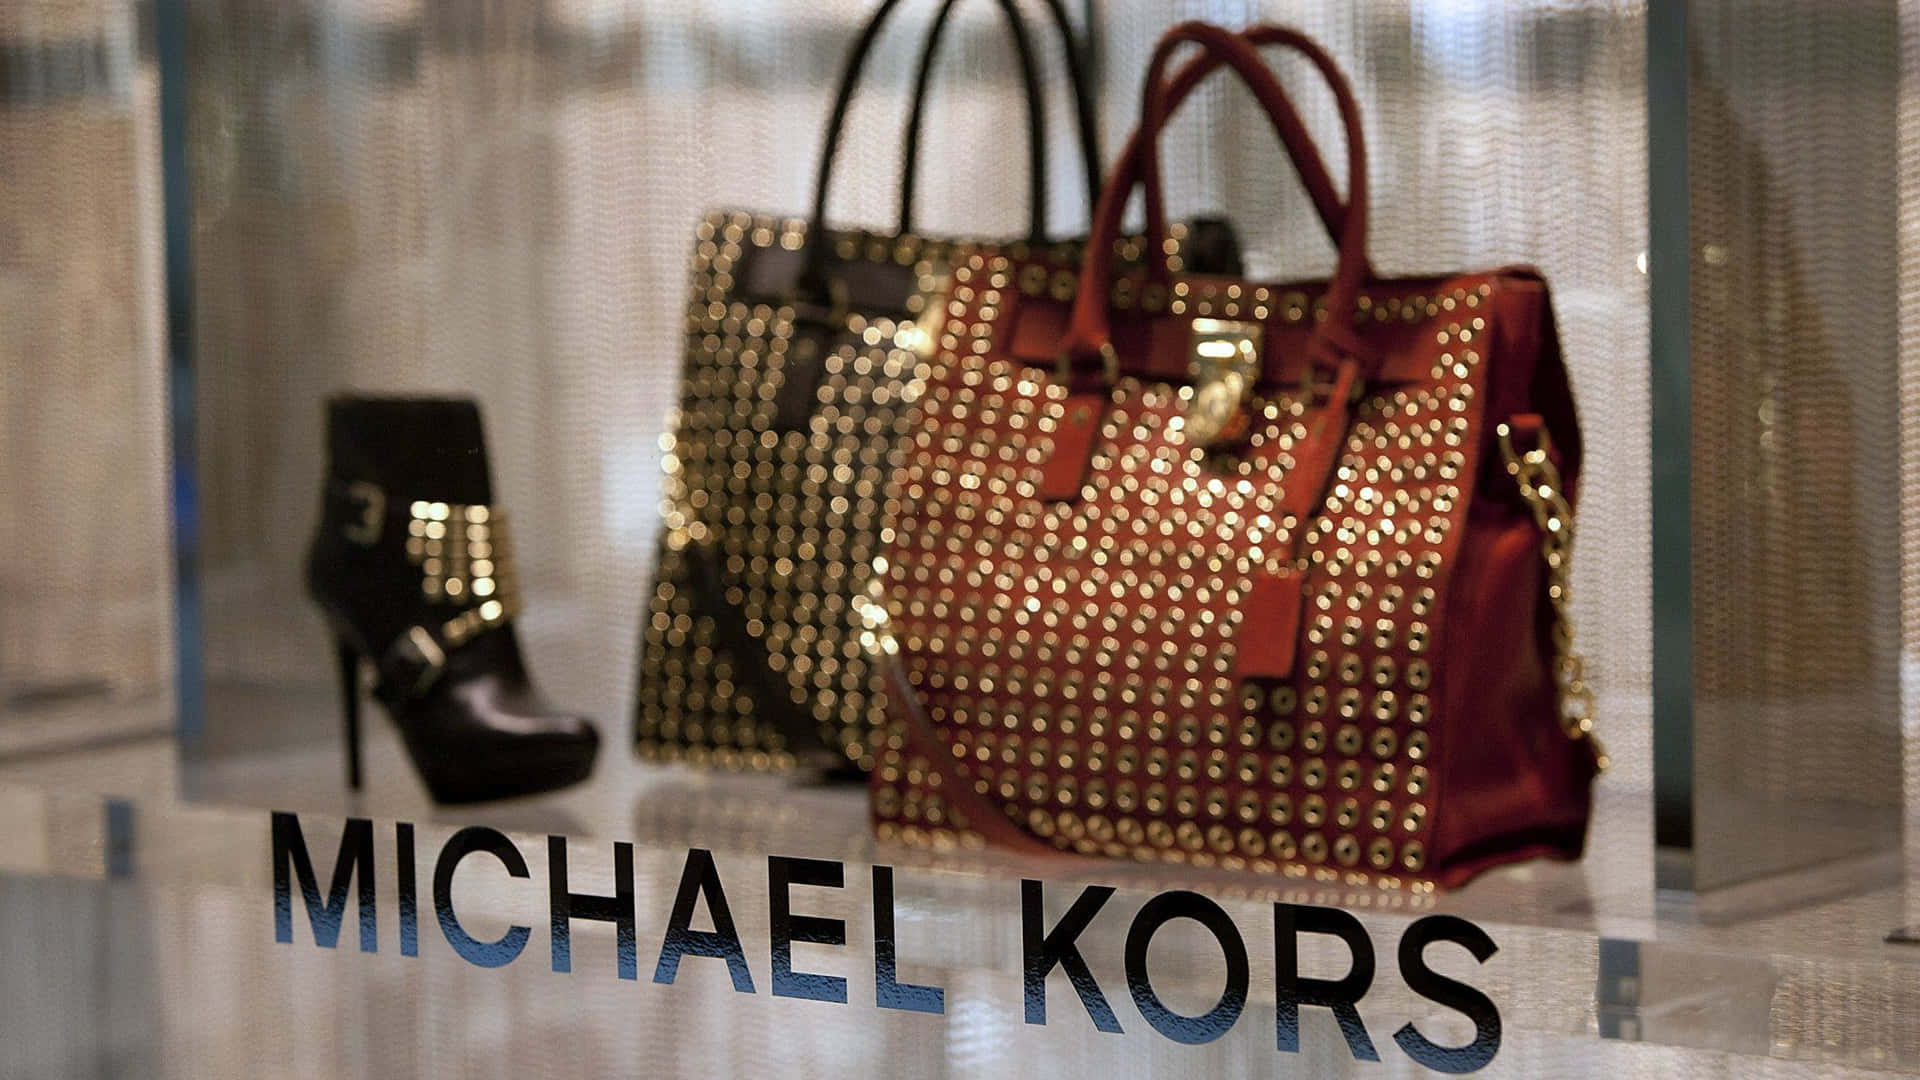 "Reach for the Sky with Michael Kors"